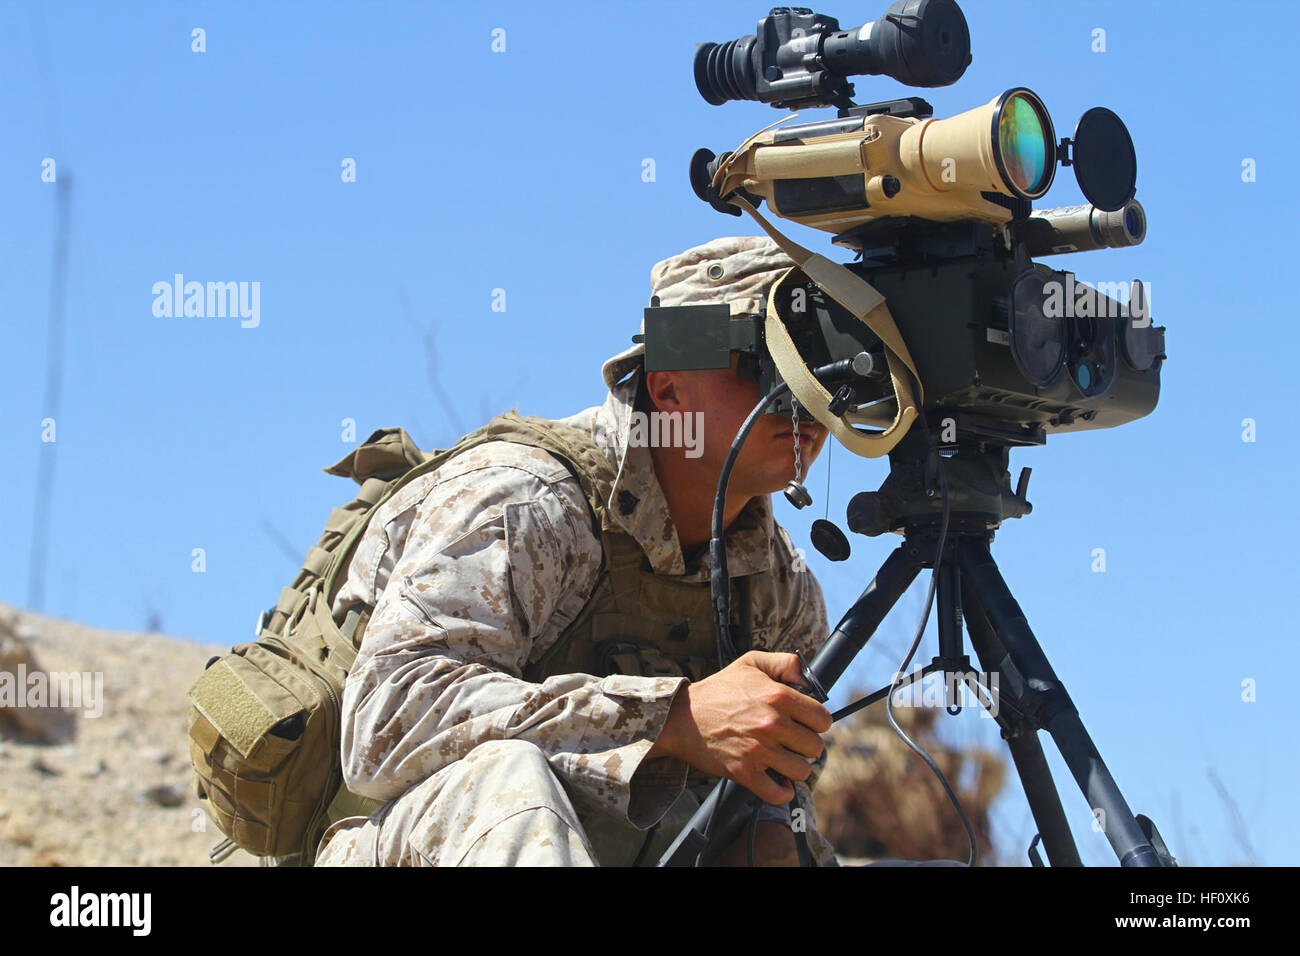 Sgt. Shaye Carter, platoon sergeant, Personal Security Detail, Regimental Combat Team-7, looks through the Portable Lightweight Designator/Rangefinder during a Fire Support Coordination Exercise as part of Enhanced Mojave Viper 7-12, July 24. Carter, the joint fires observer for PSD, coordinated with close air support to ensure simulated targets were properly destroyed. 'Raining Steel,' Marines practice close air support tactics 120724-M-IV927-010 Stock Photo